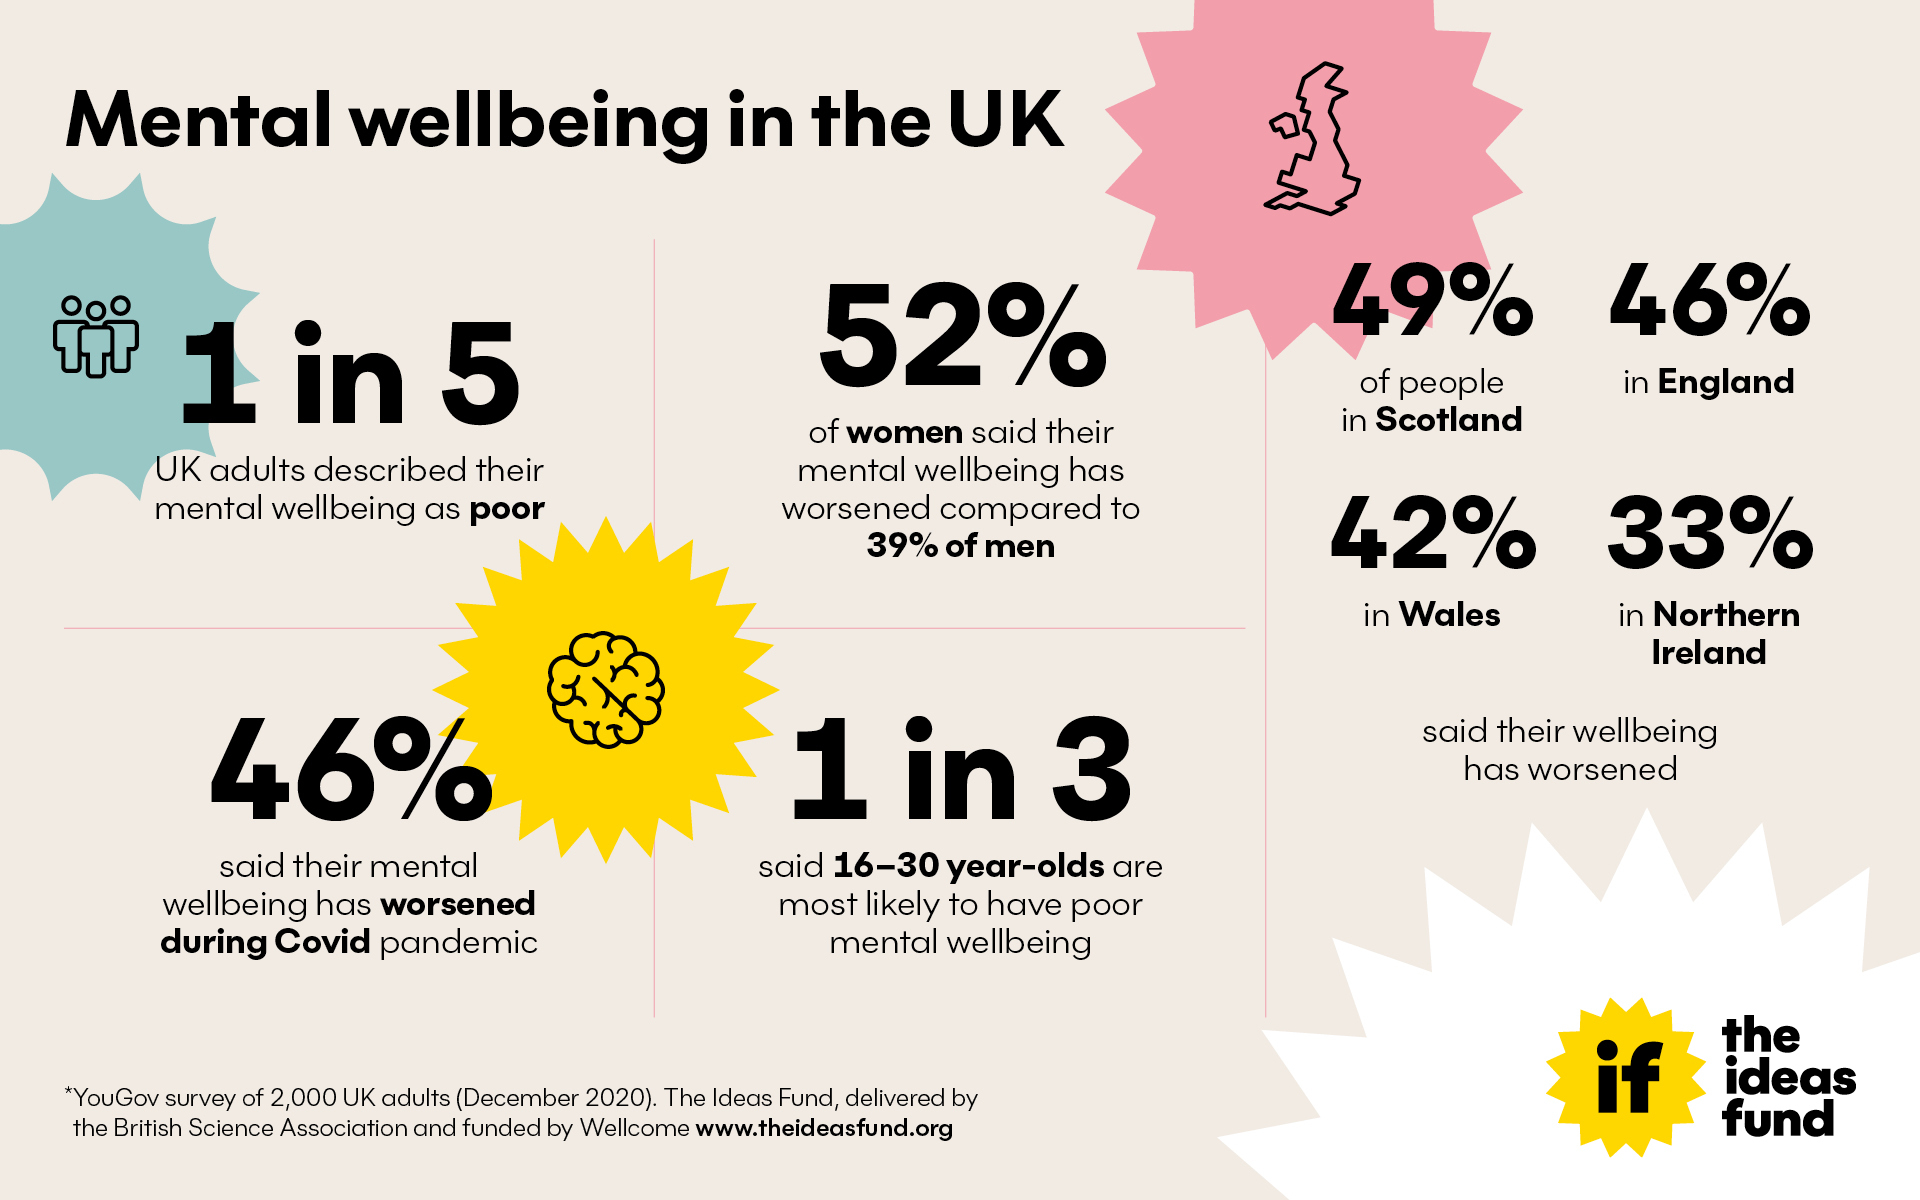 Mental wellbeing in the UK infographic